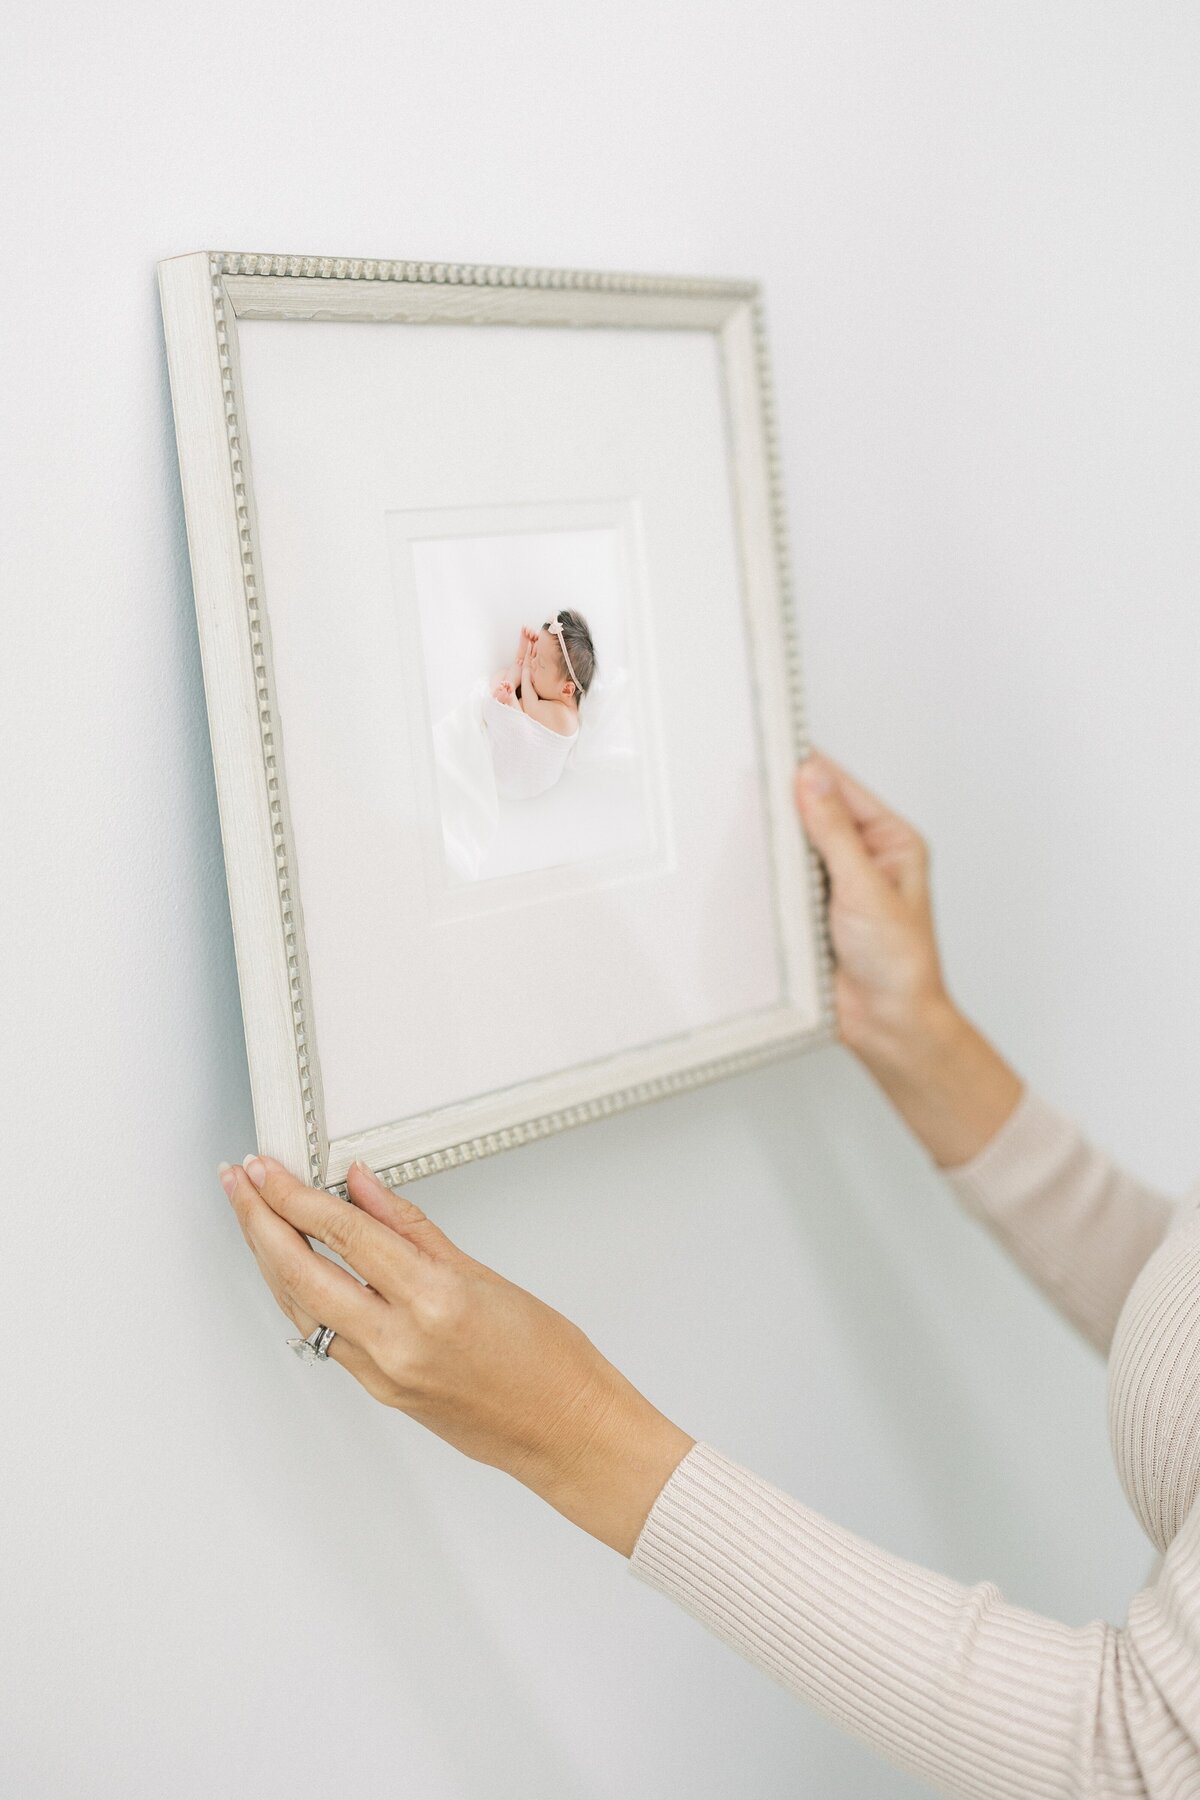 Framed portrait of newborn baby being hung on the wal by photographer Amanda Carter